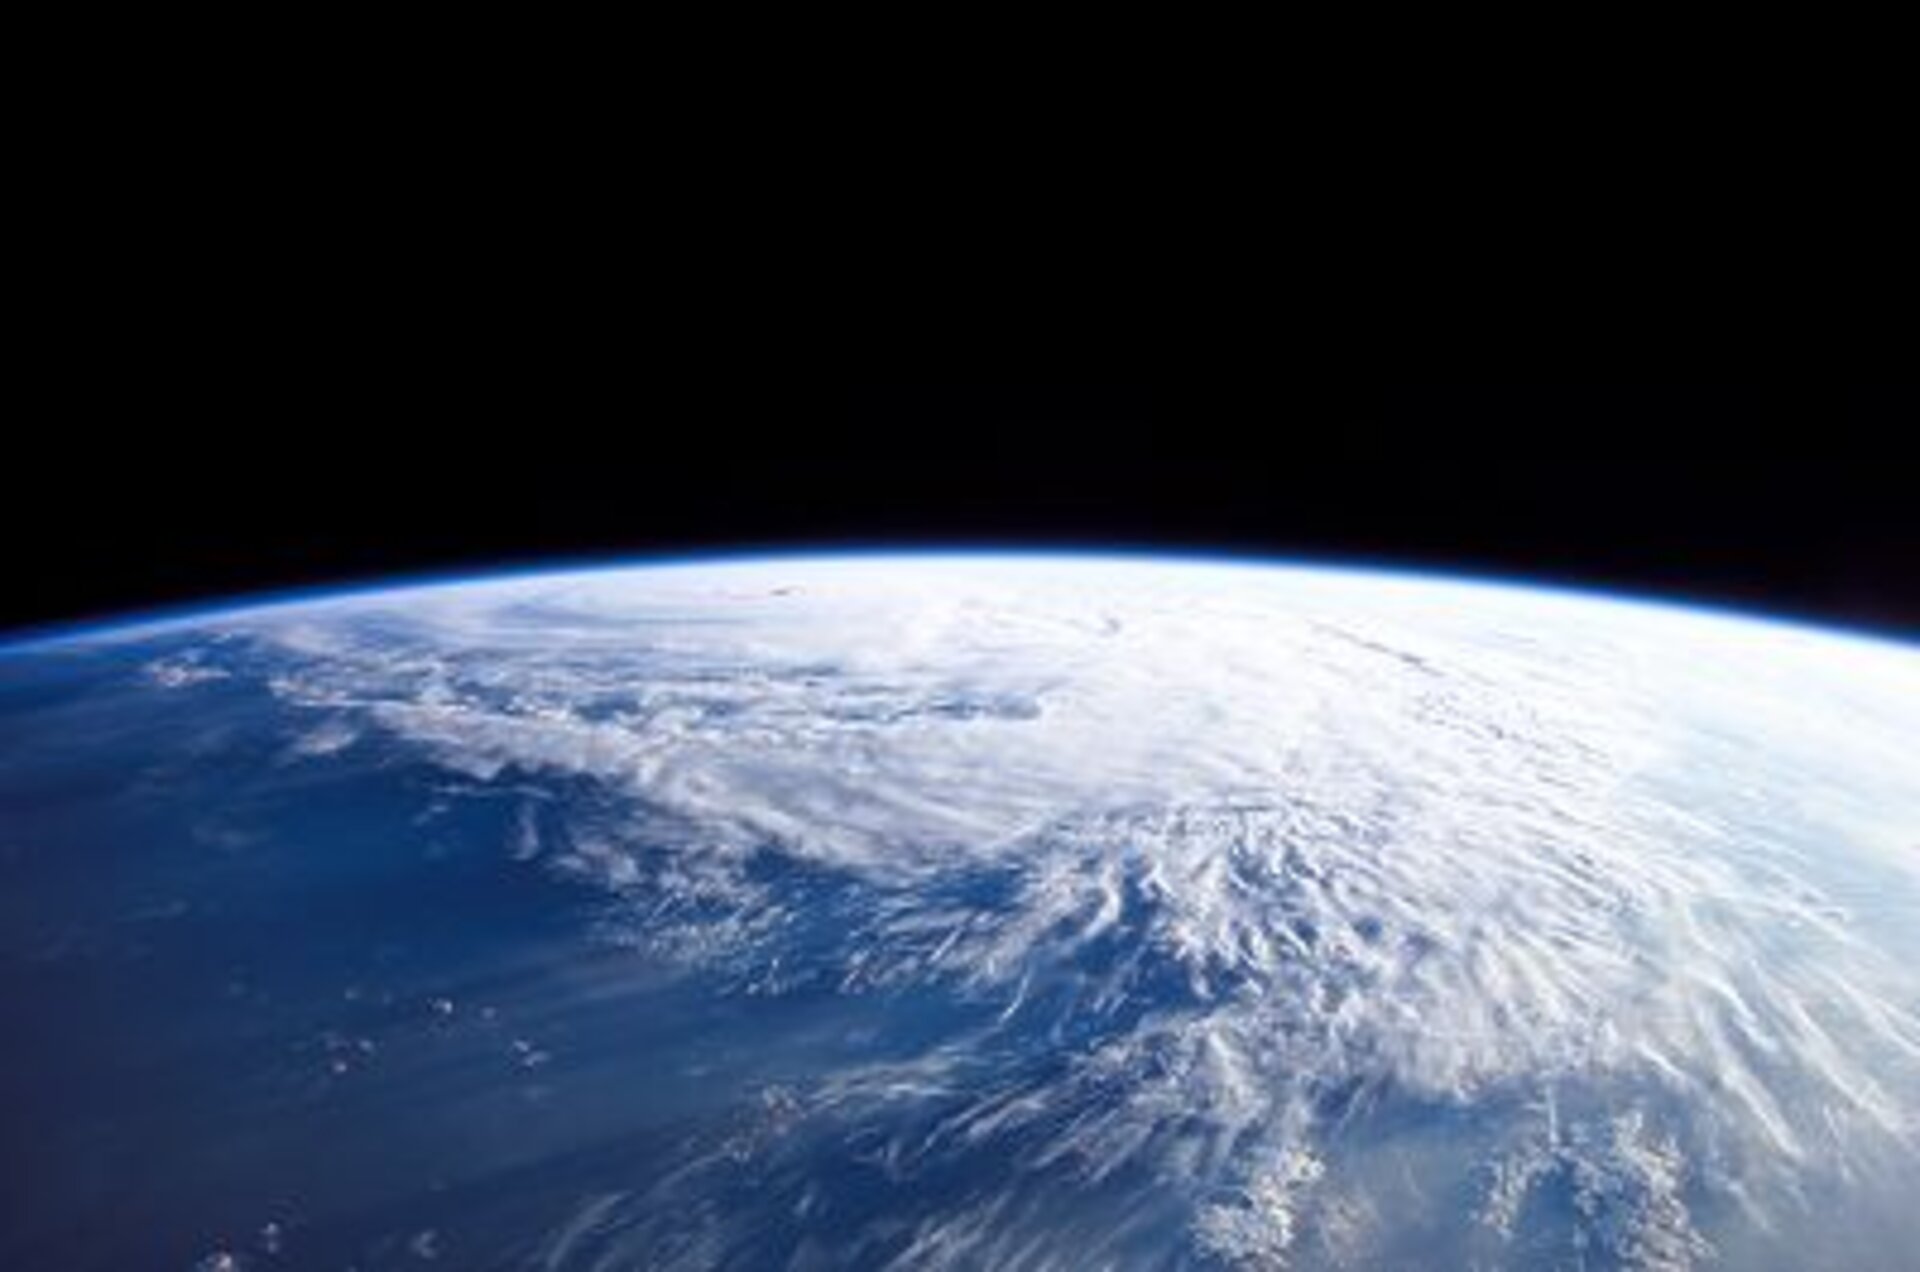 Very thin blue layer: the atmosphere protecting our planet